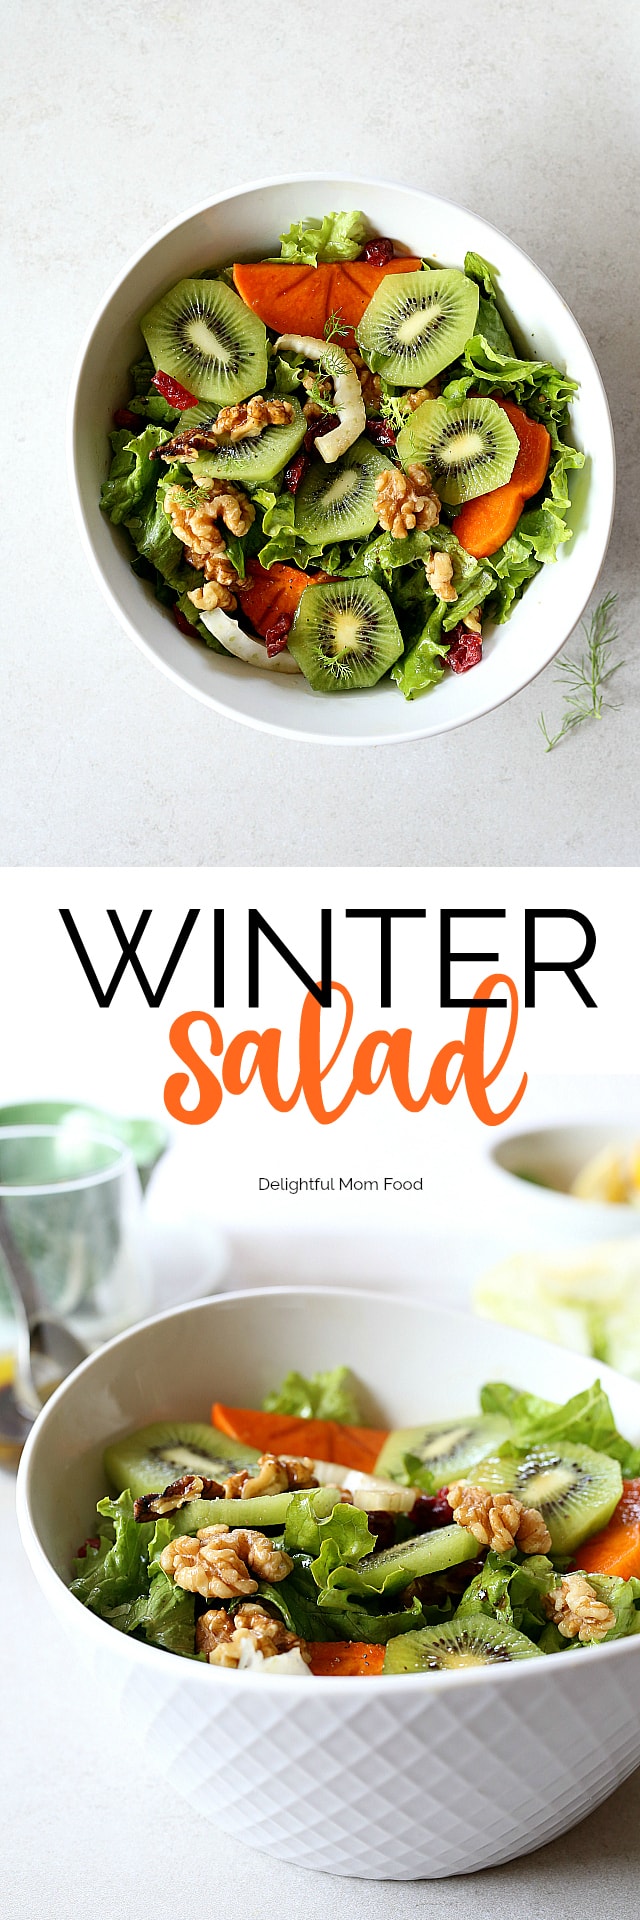 Winter Salad with Kiwi, Persimmons, Walnuts and Cranberry in a walnut vinaigrette dressing. Top the green salad with dried cranberries or pomegranate seeds for an extra burst of color and tang! 